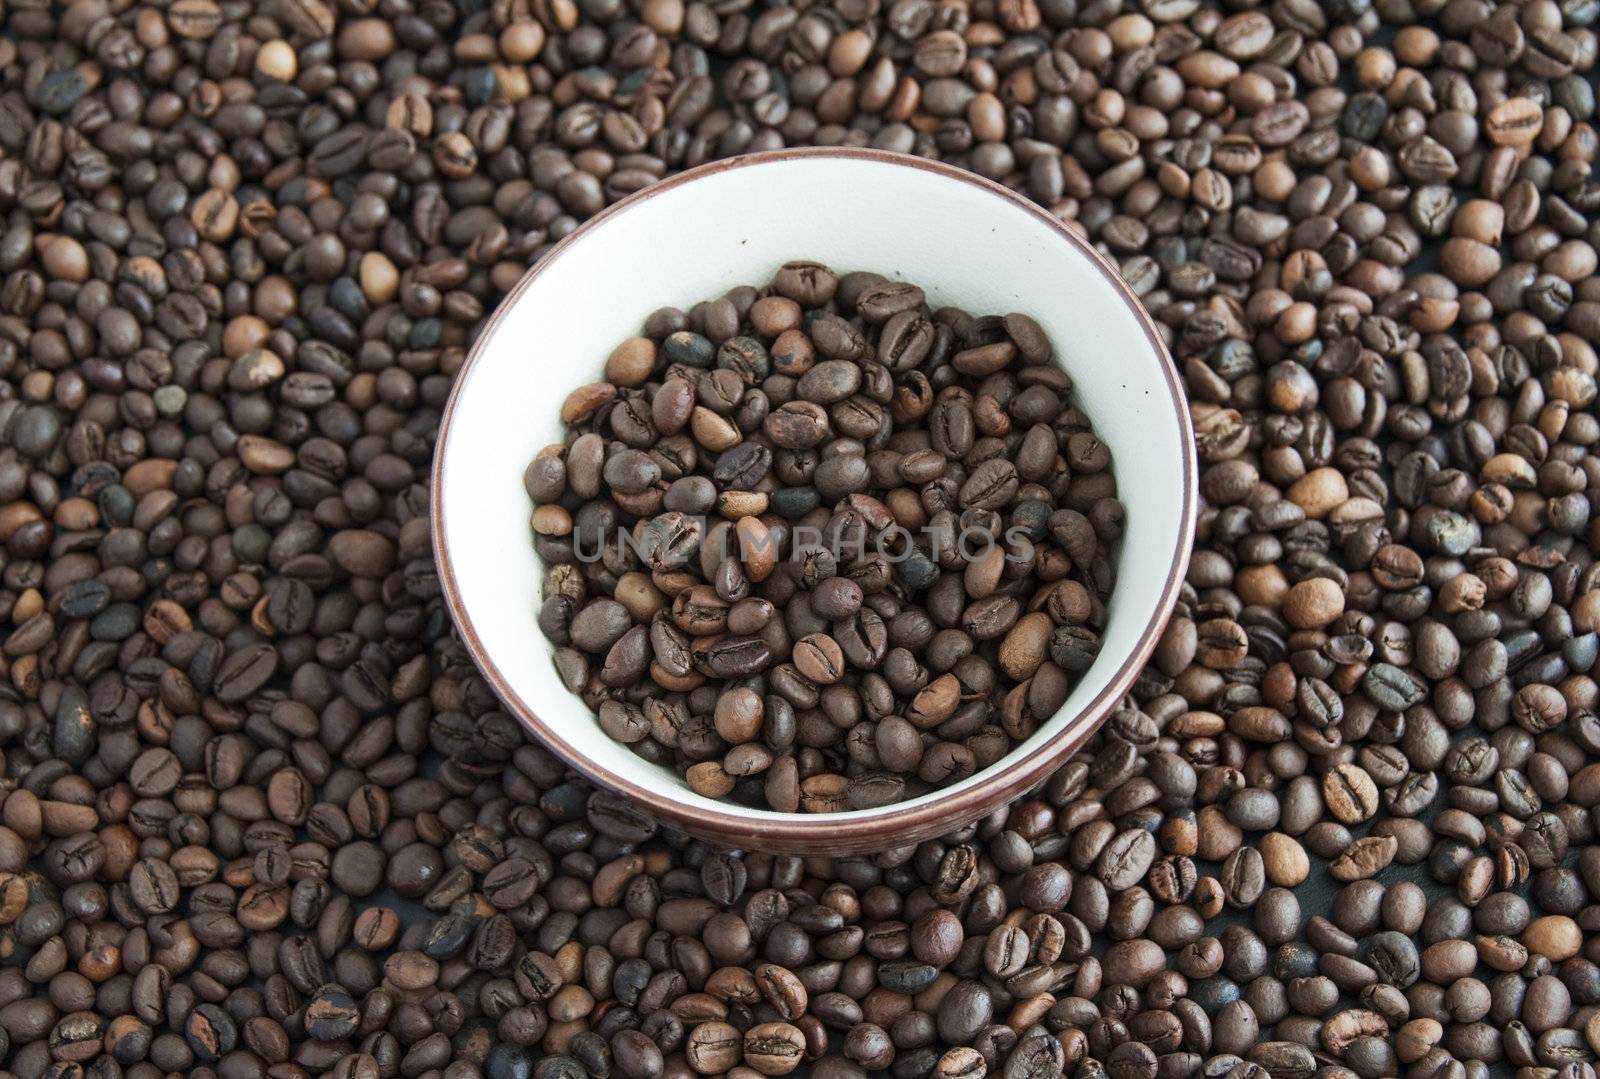 A cup full of coffee beans, surrounded by other coffee beans